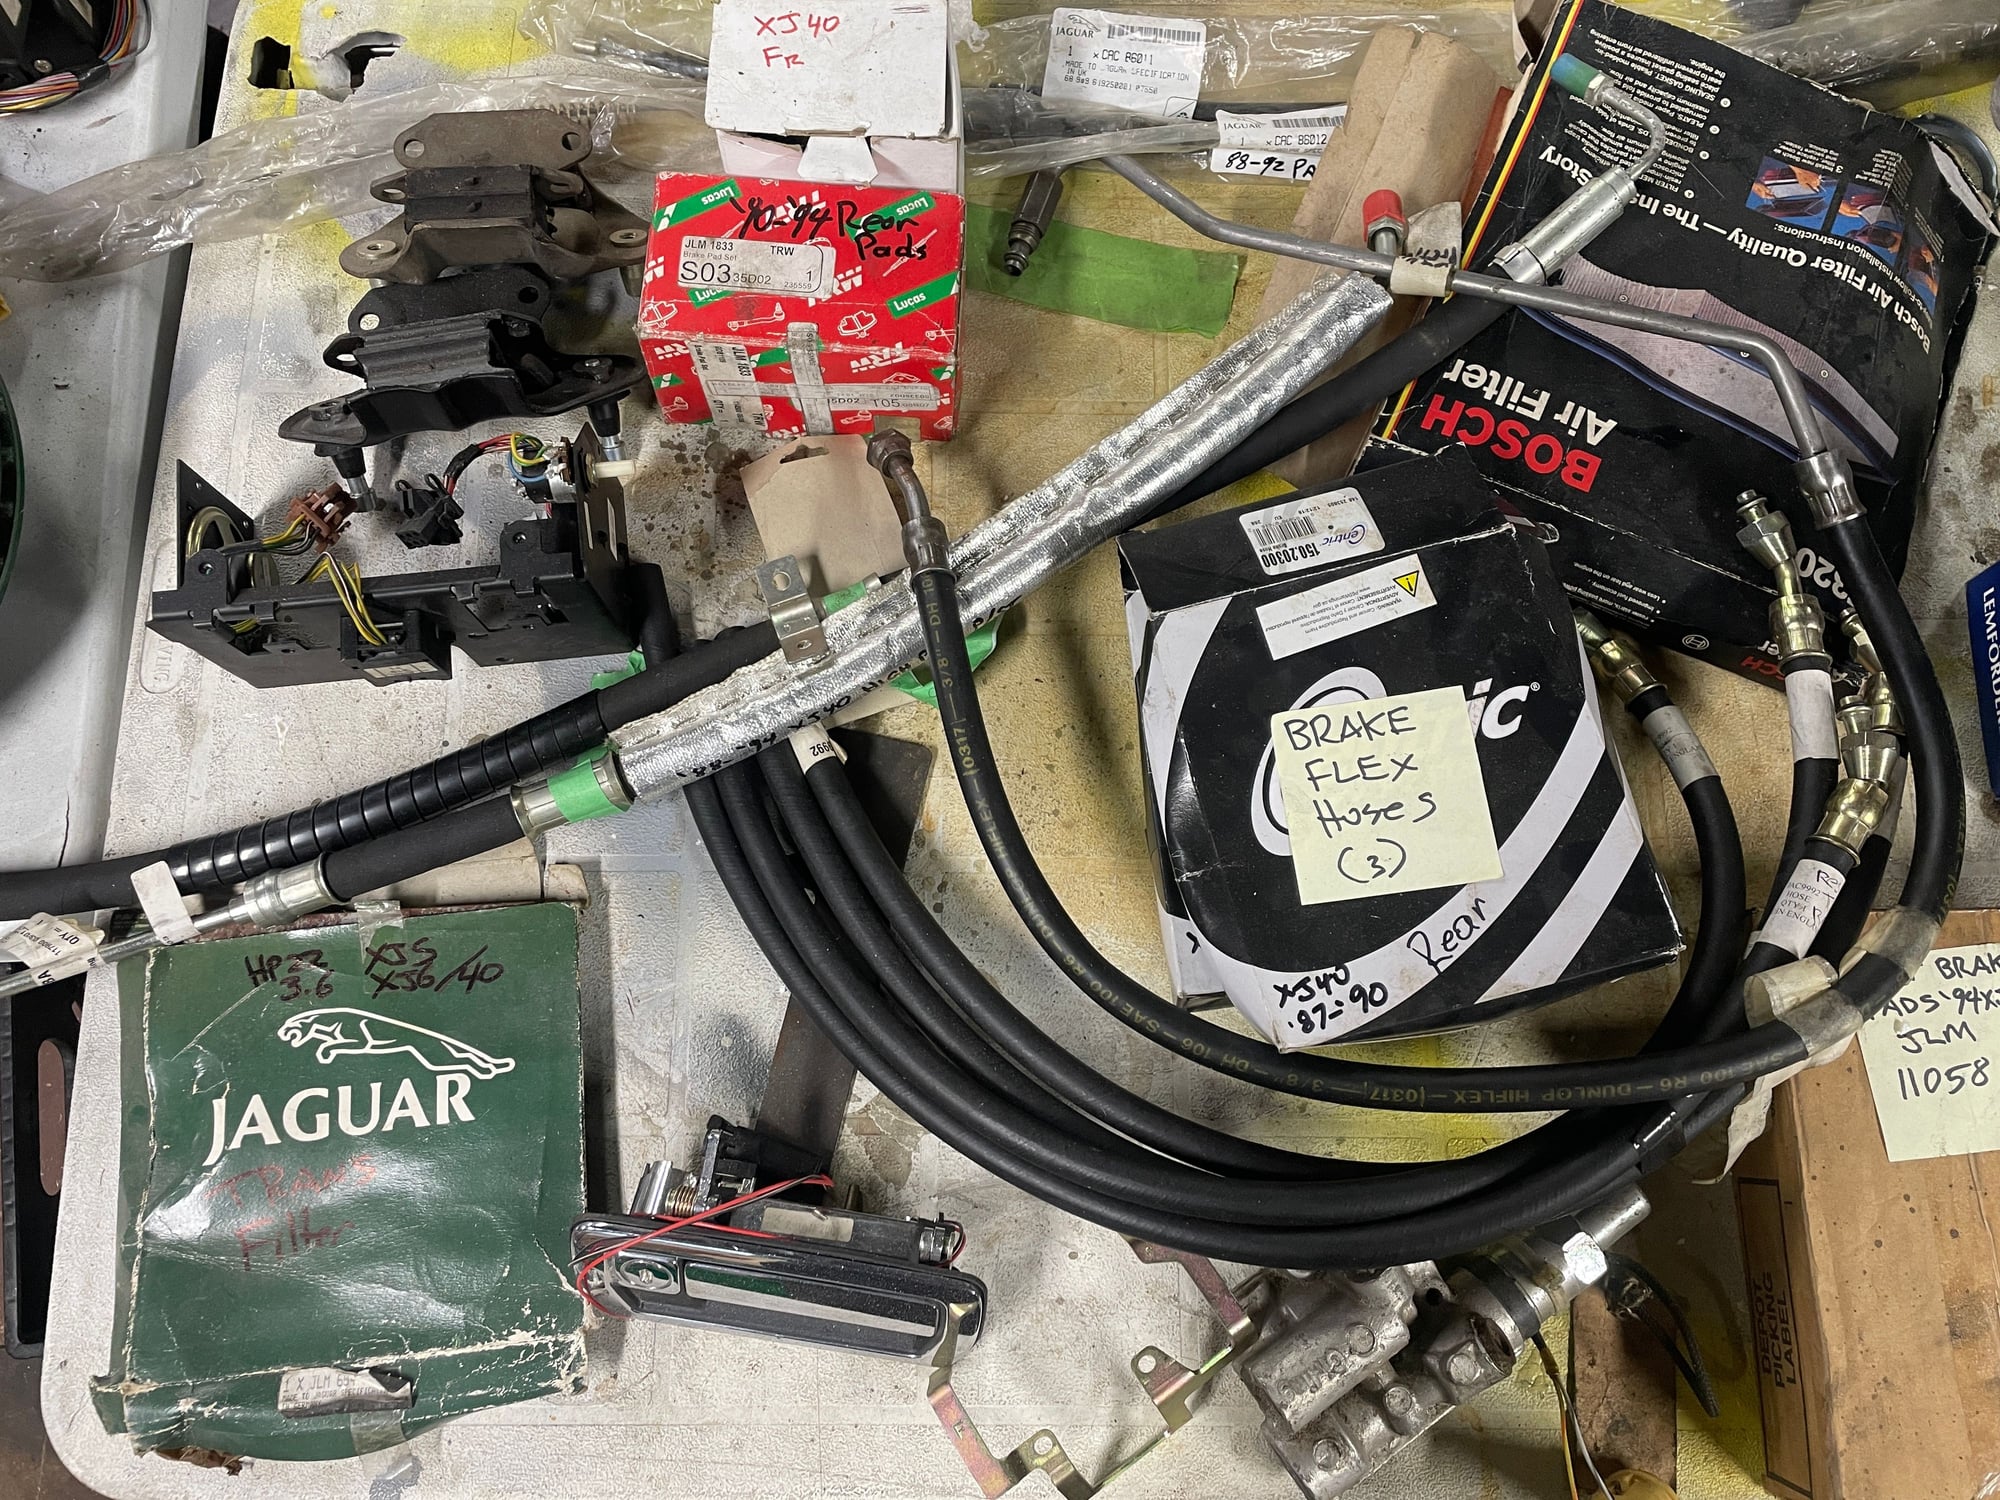 Miscellaneous - XJ40 parts, mostly NOS - New - 1988 to 1994 Jaguar XJ - Niagara On The Lake, ON L0S1J0, Canada